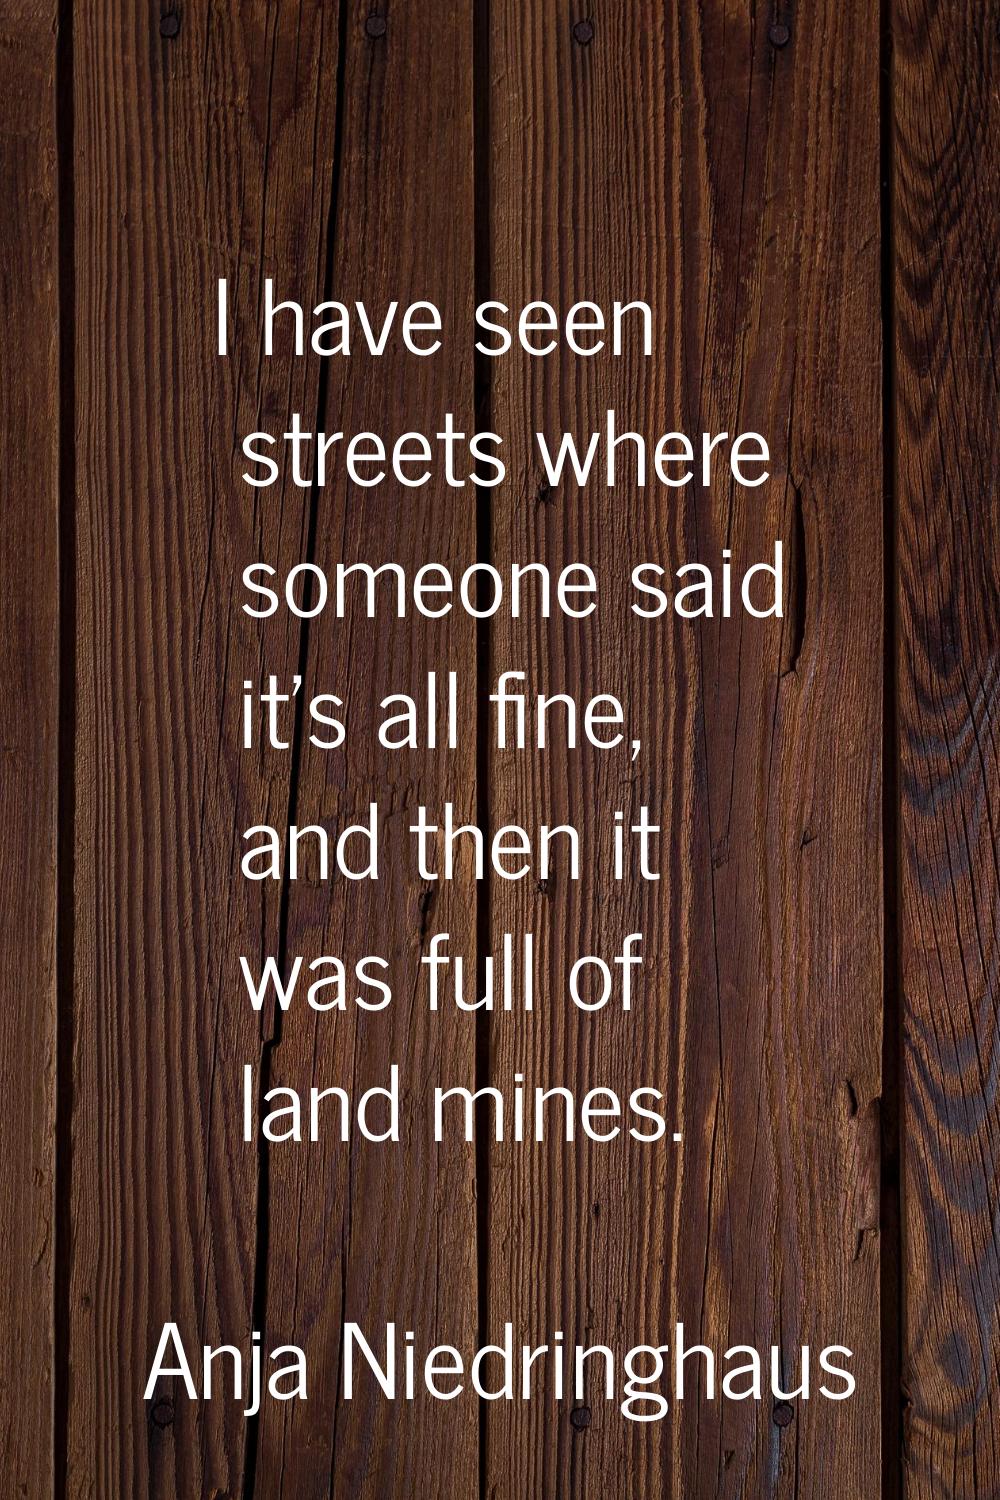 I have seen streets where someone said it's all fine, and then it was full of land mines.